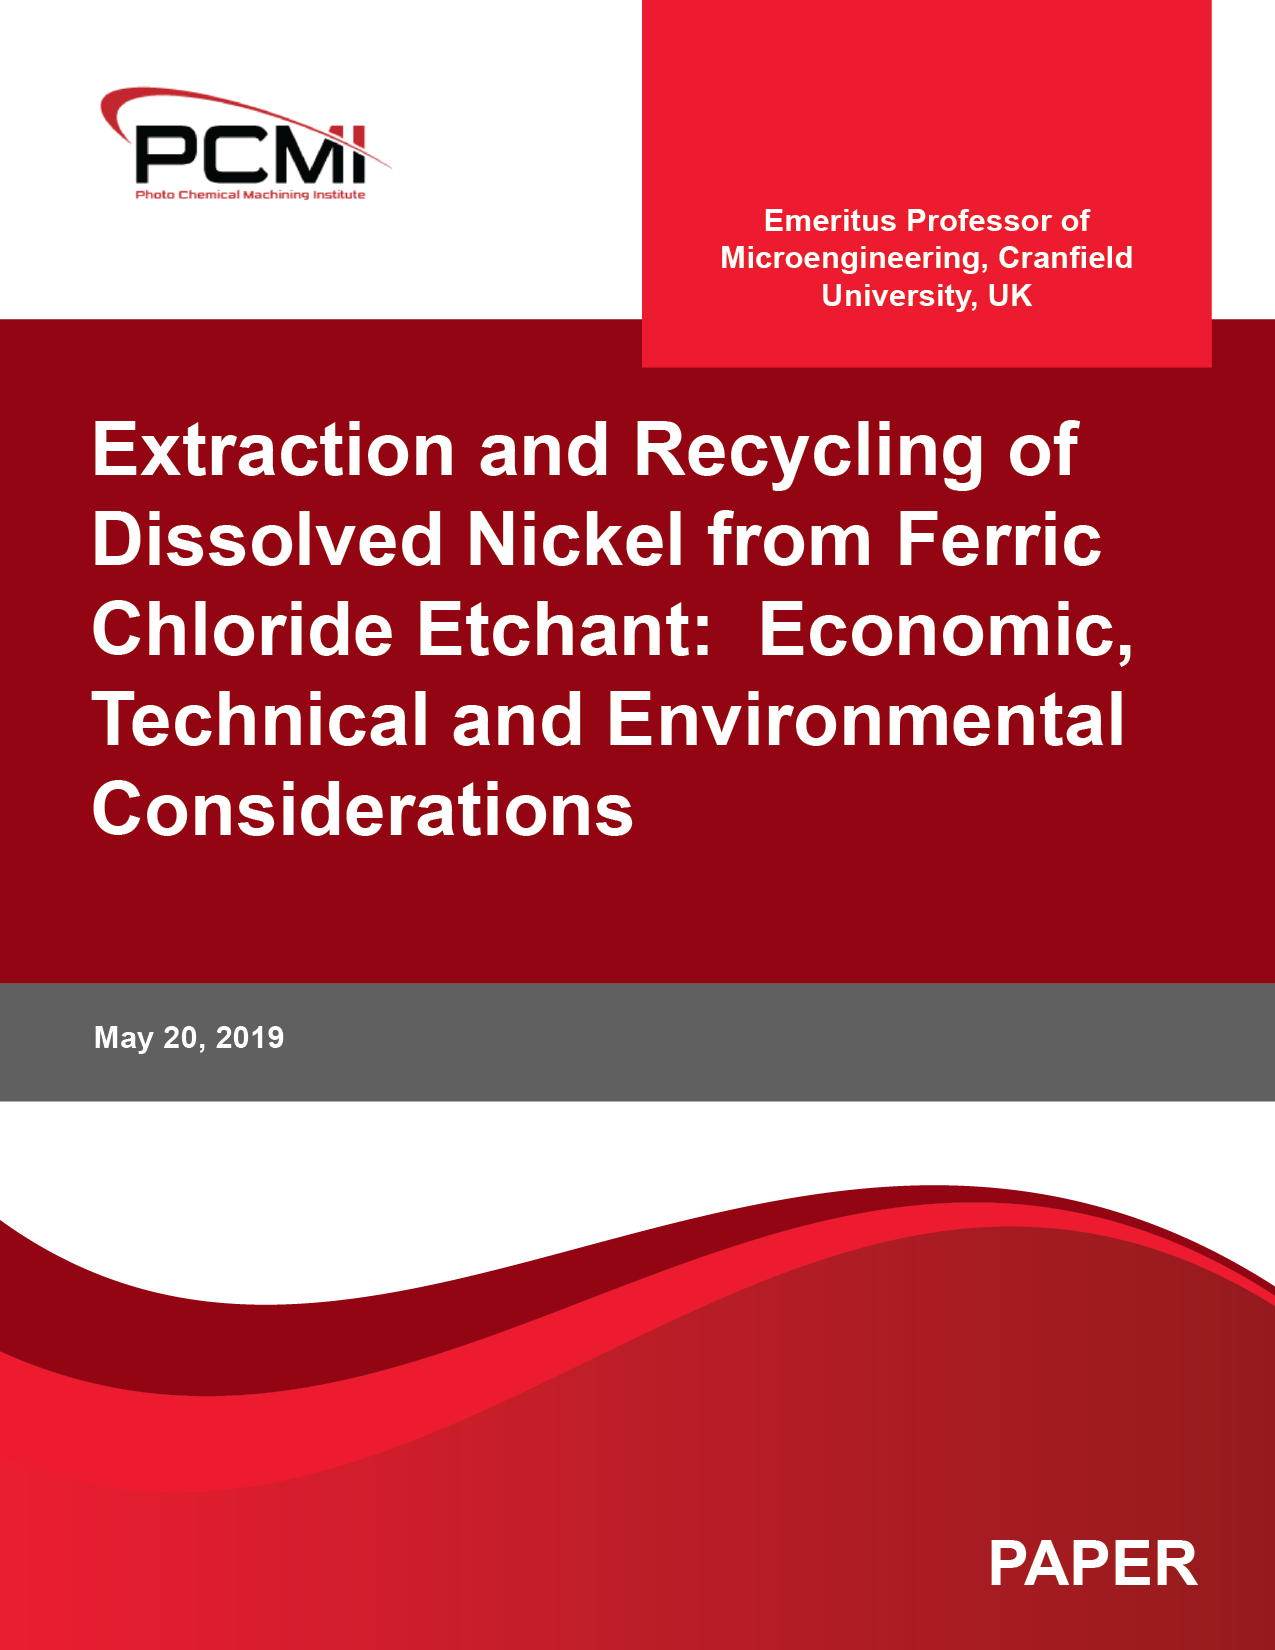 Extraction and Recycling of Dissolved Nickel from Ferric Chloride Etchant:  Economic, Technical and Environmental Considerations